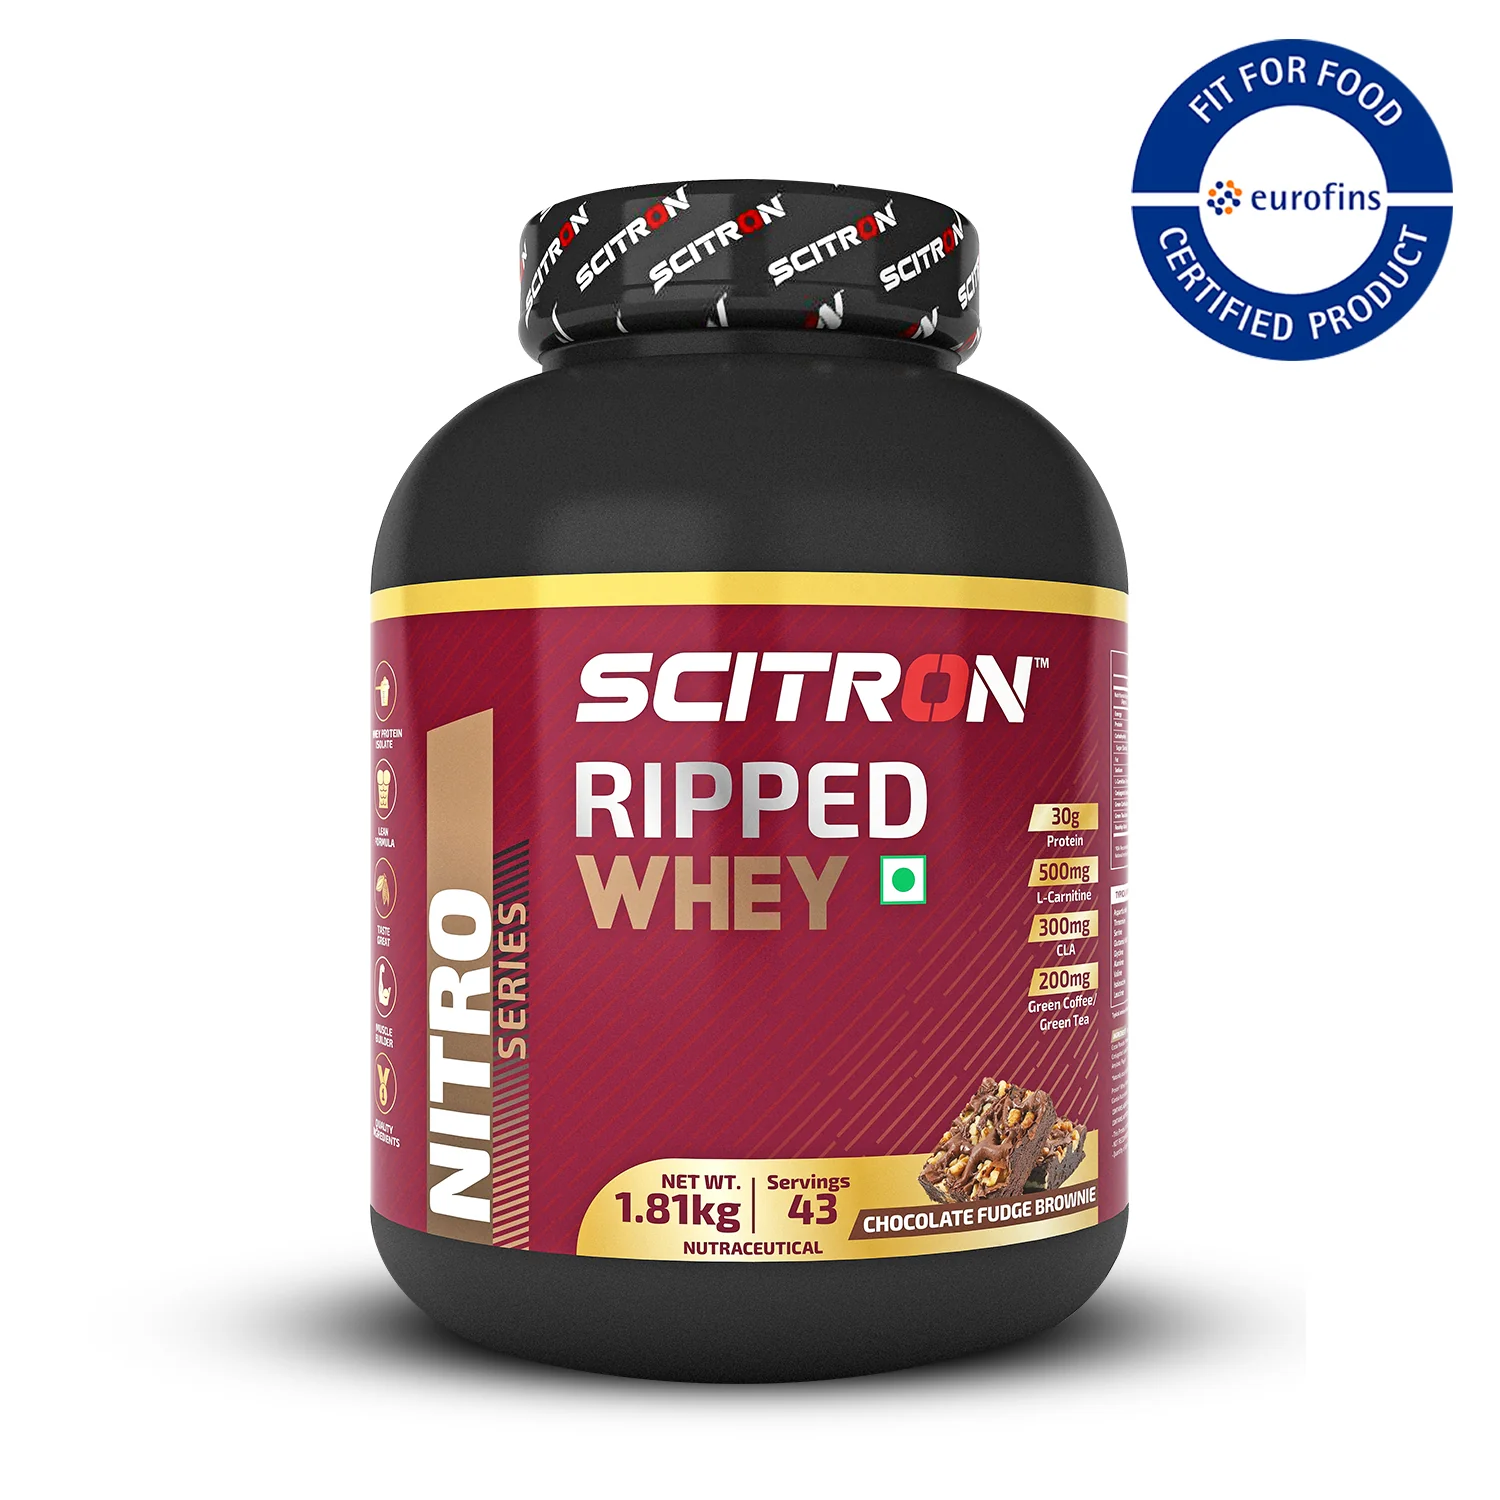 Scitron Ripped Whey Protein